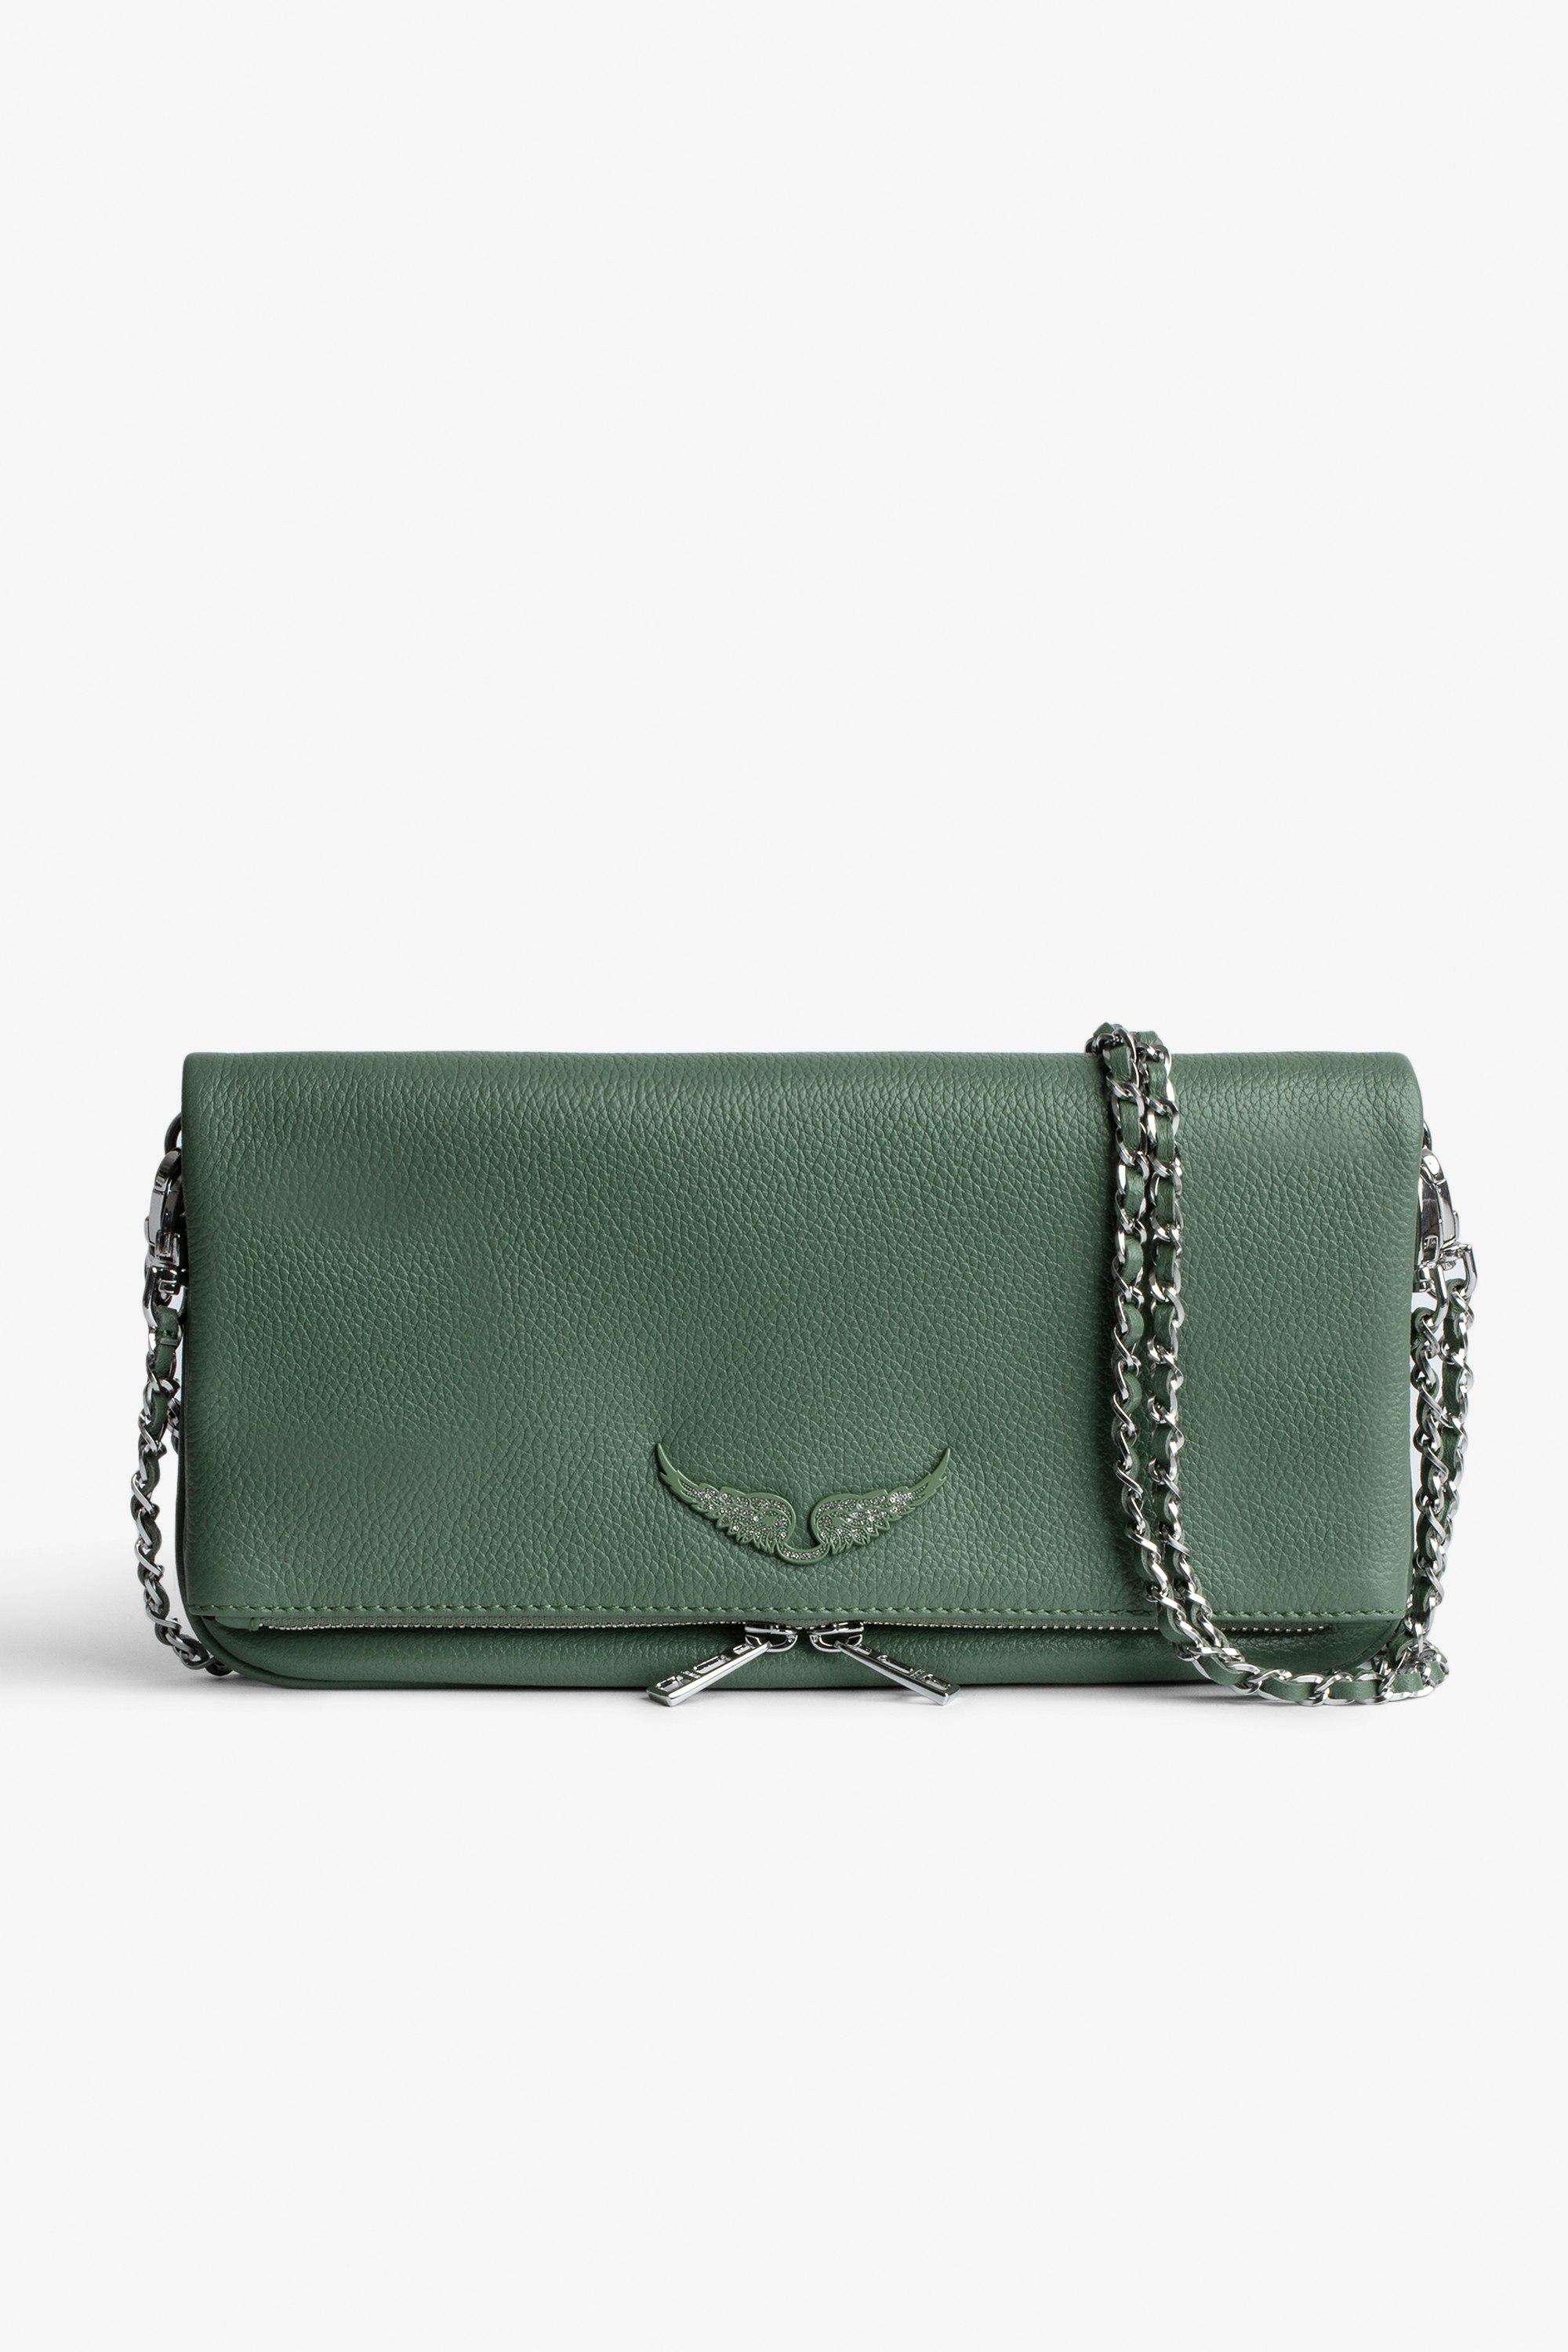 Rock Clutch Women’s khaki grained leather clutch bag with double leather-and-metal chain